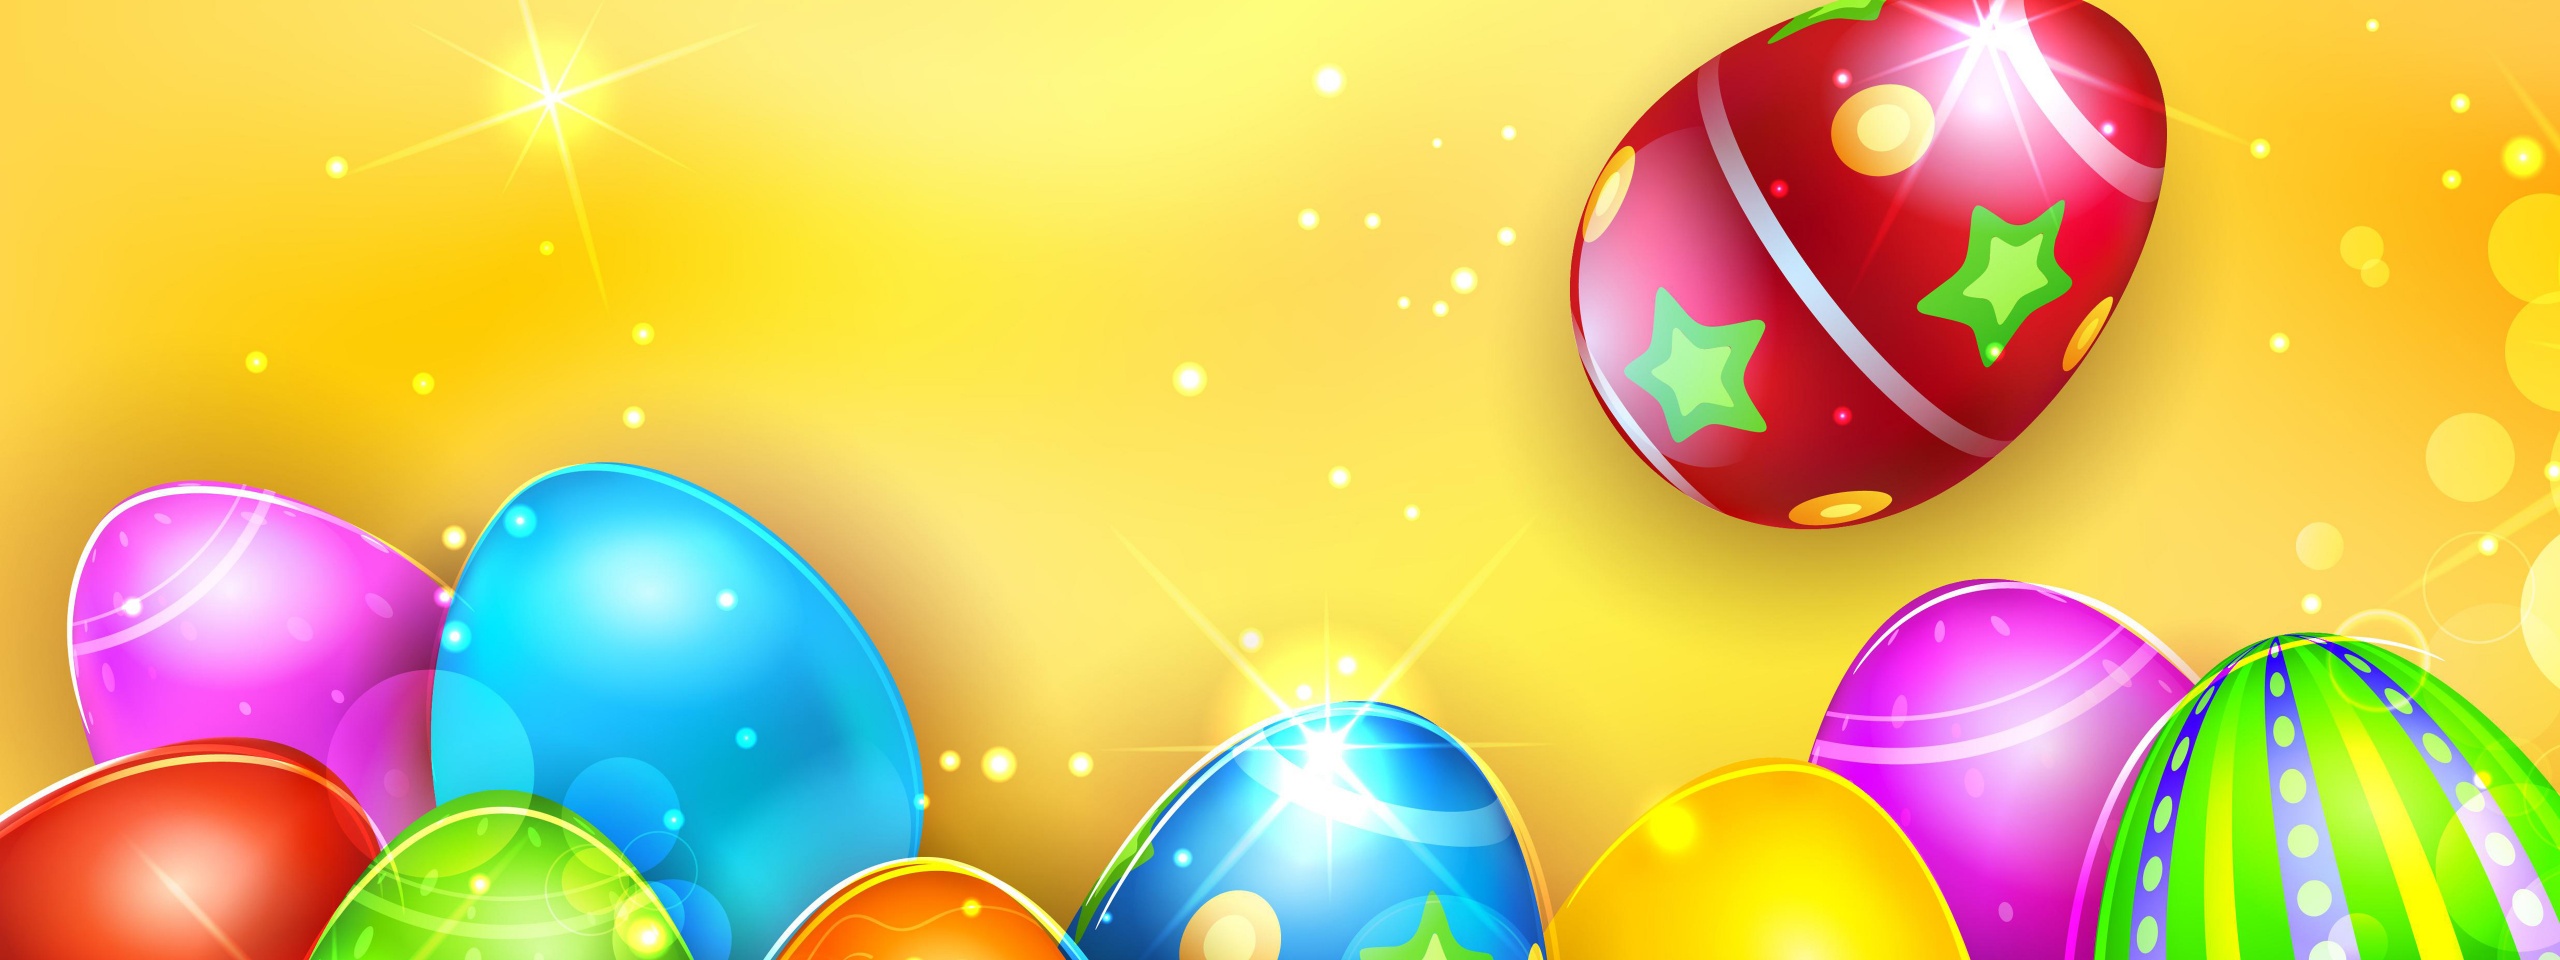 Colorful Shiny Easter Eggs